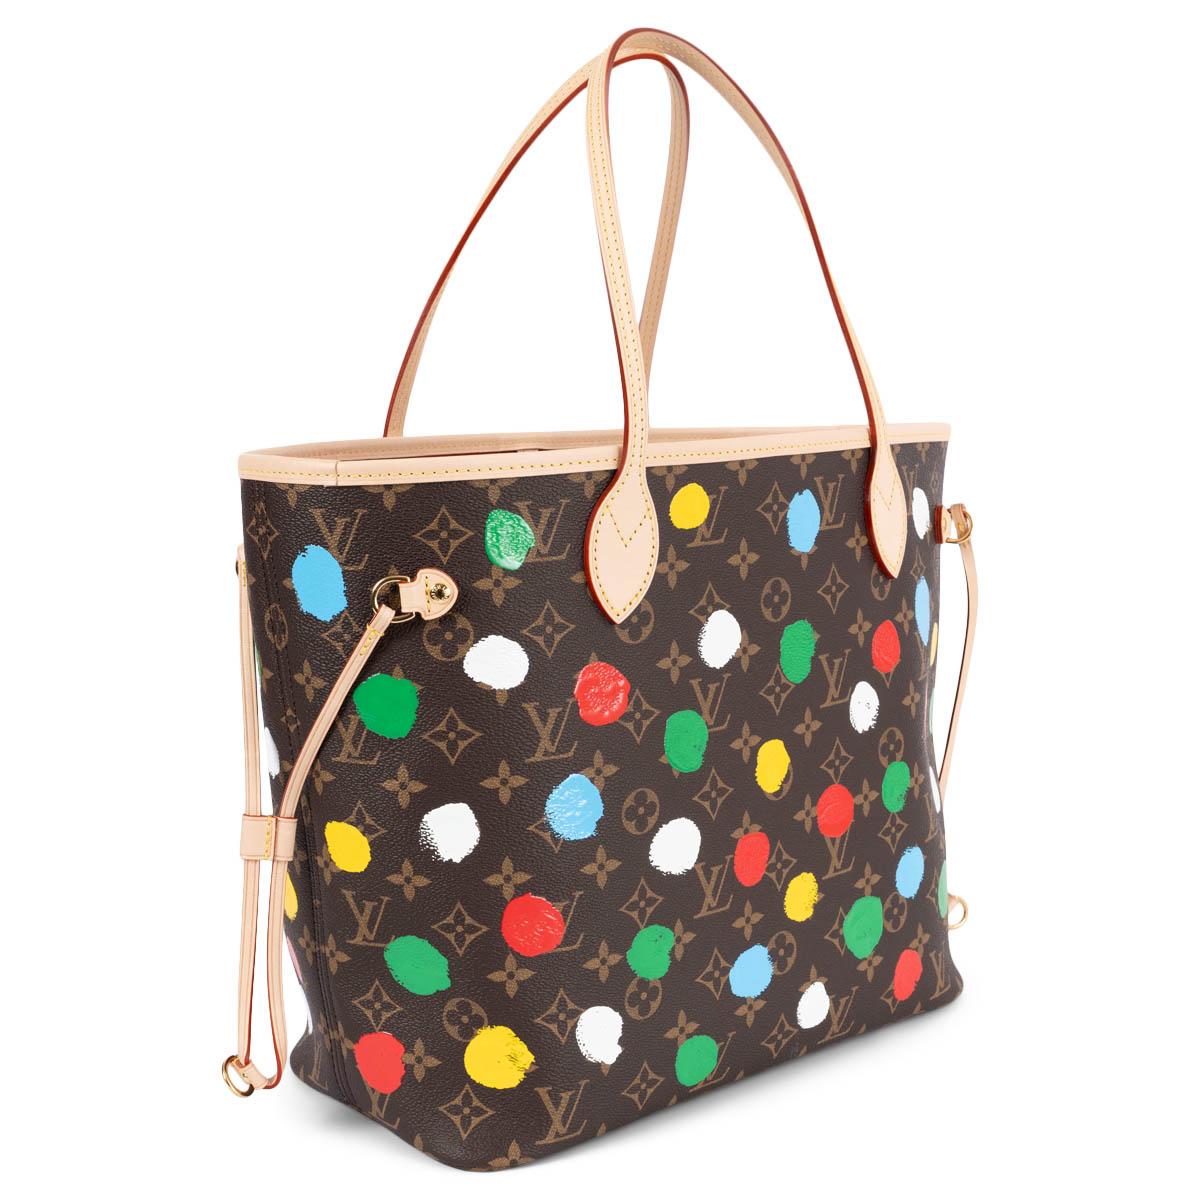 100% authentic Louis Vuitton x Yayoi Kusama Neverfull MM in Ebene brown Monogram canvas with multicolor 3D painted dots. Features natural cowhide-leather trim, straps, handles and gold-plated hardware. Closes with a dog hook on top. Lined in red